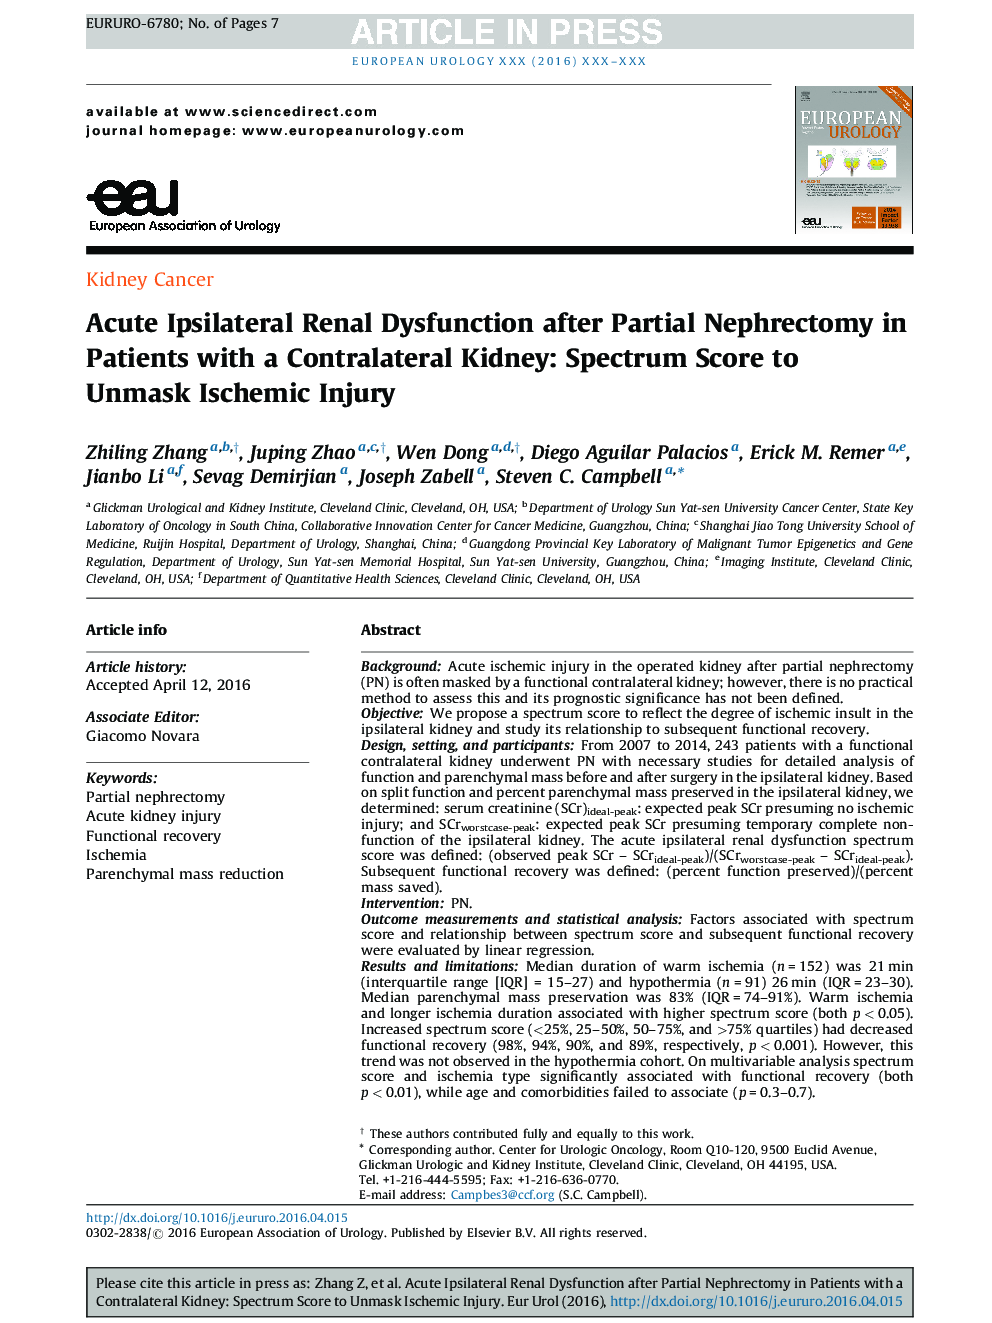 Acute Ipsilateral Renal Dysfunction after Partial Nephrectomy in Patients with a Contralateral Kidney: Spectrum Score to Unmask Ischemic Injury